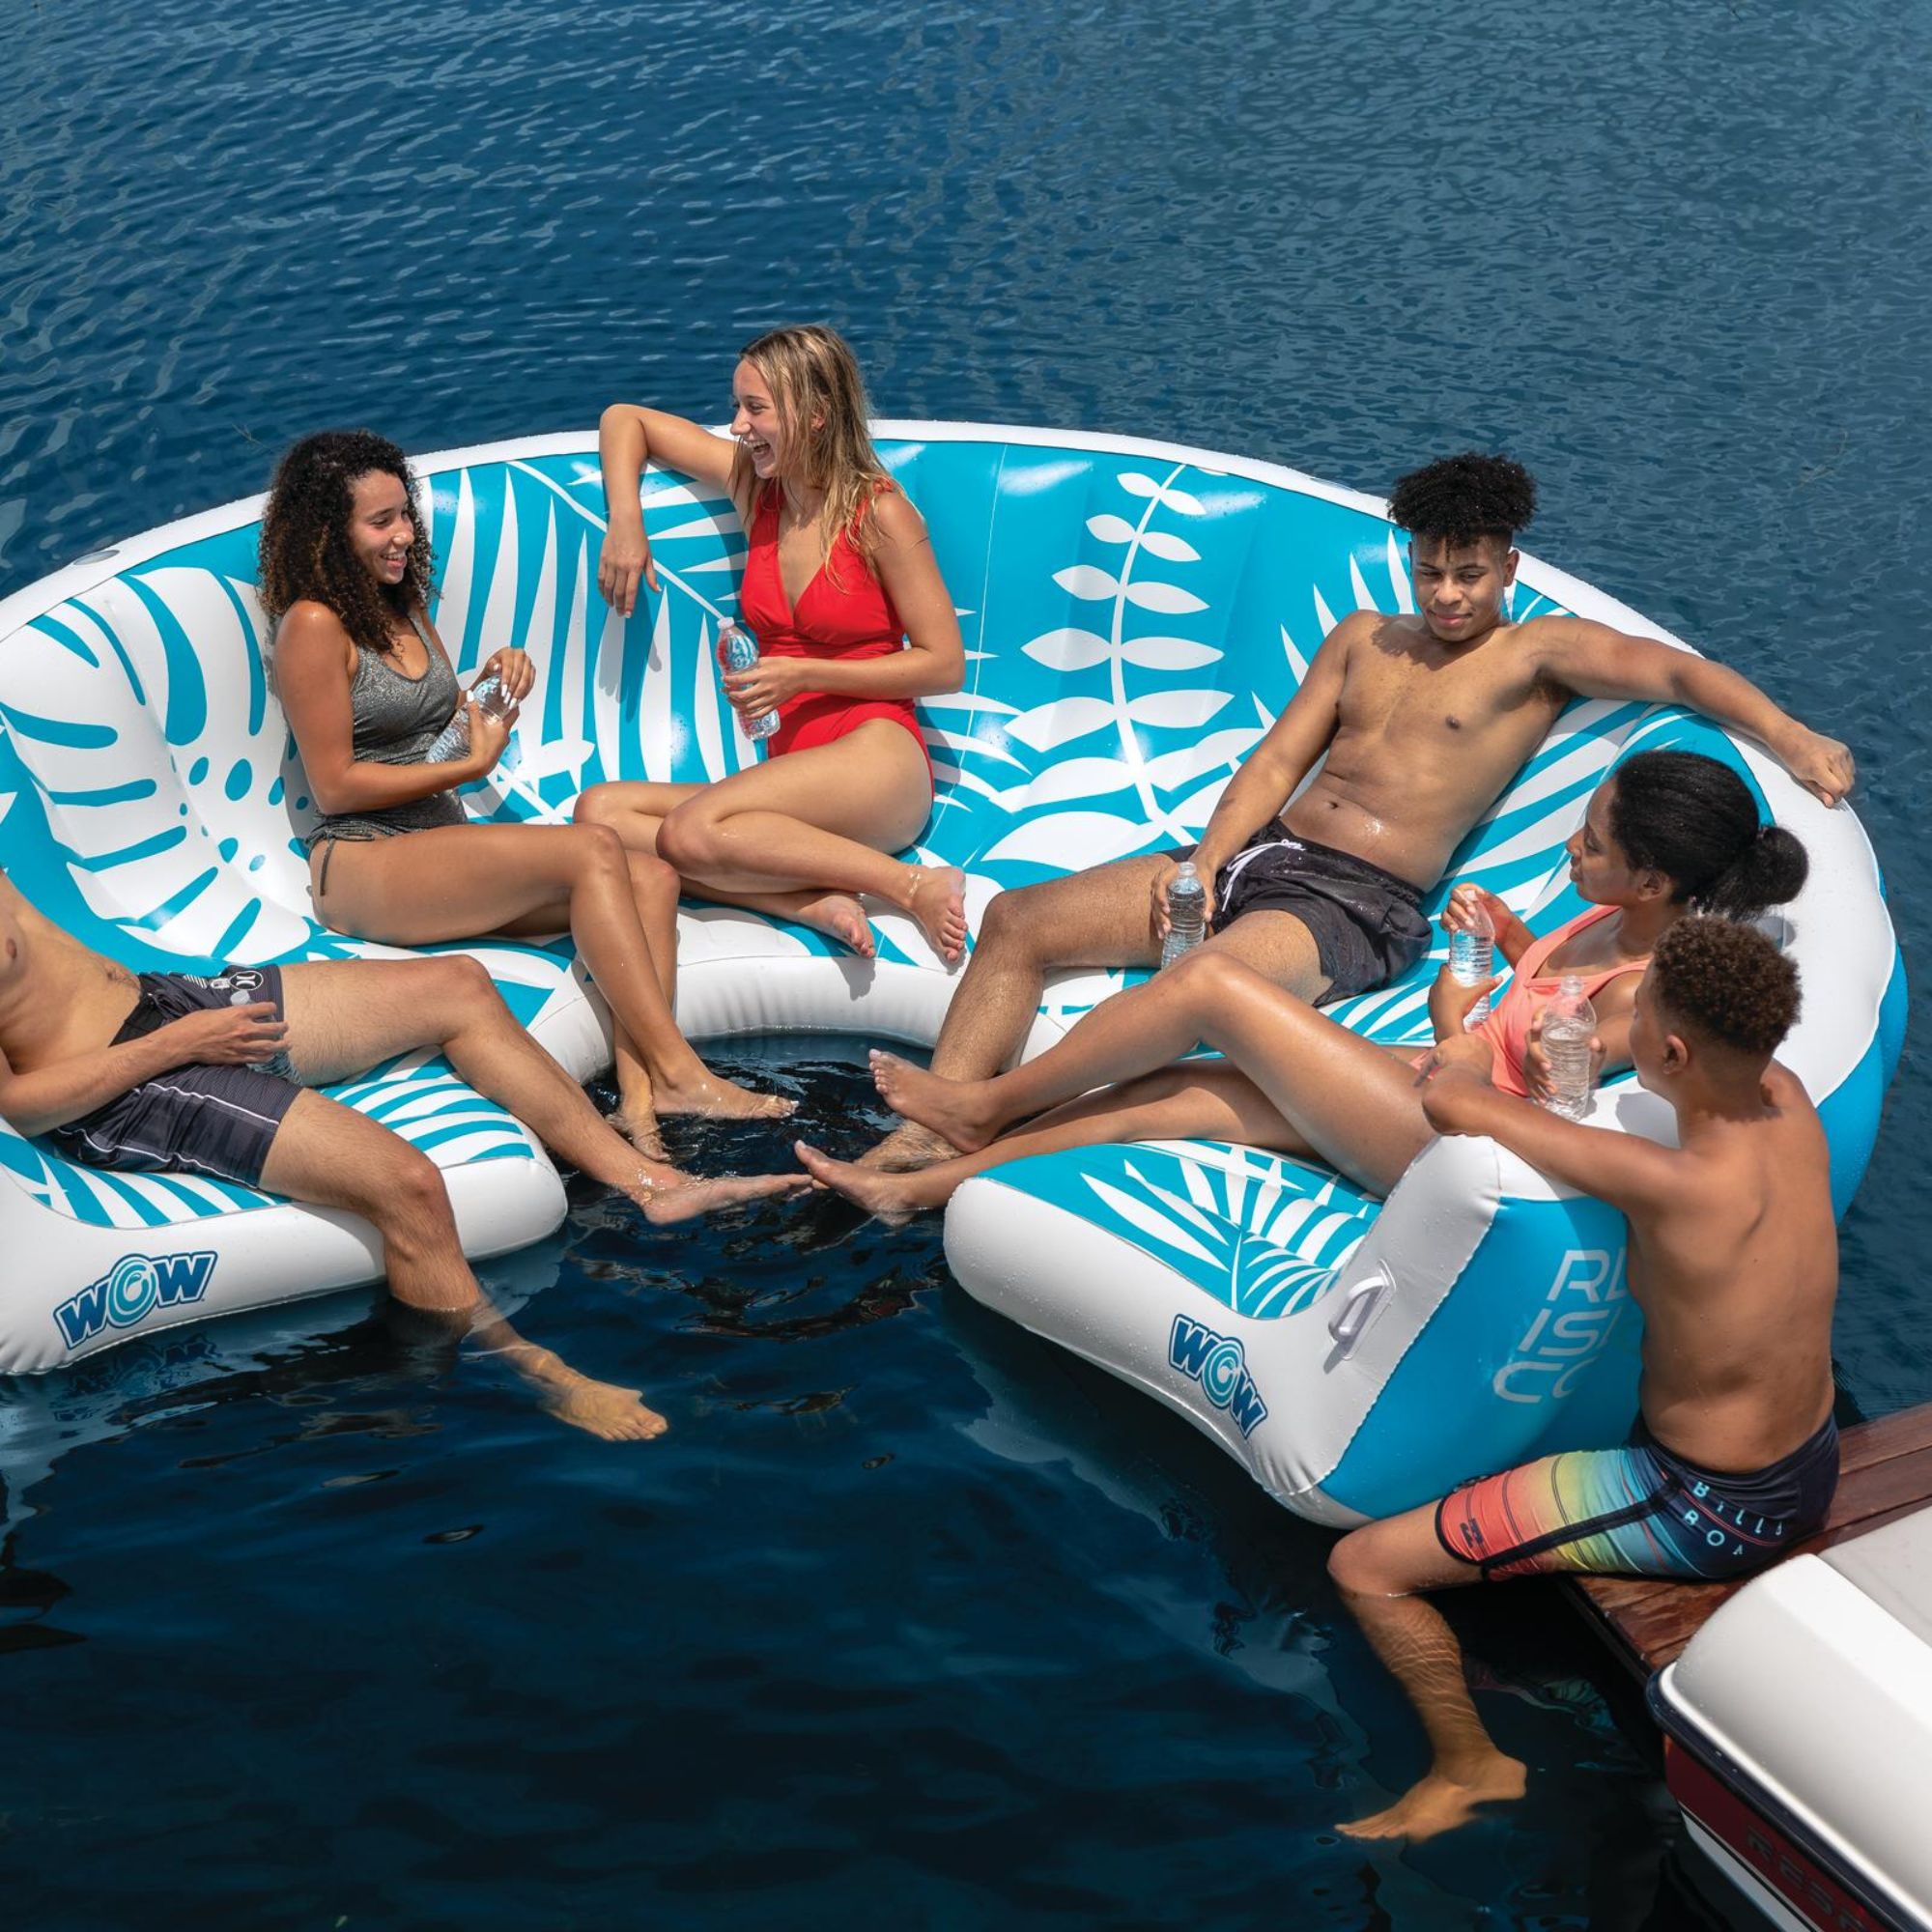 WOW World of Watersports WOW Sports Inflatable Lounging Resort Island for 6-8 People